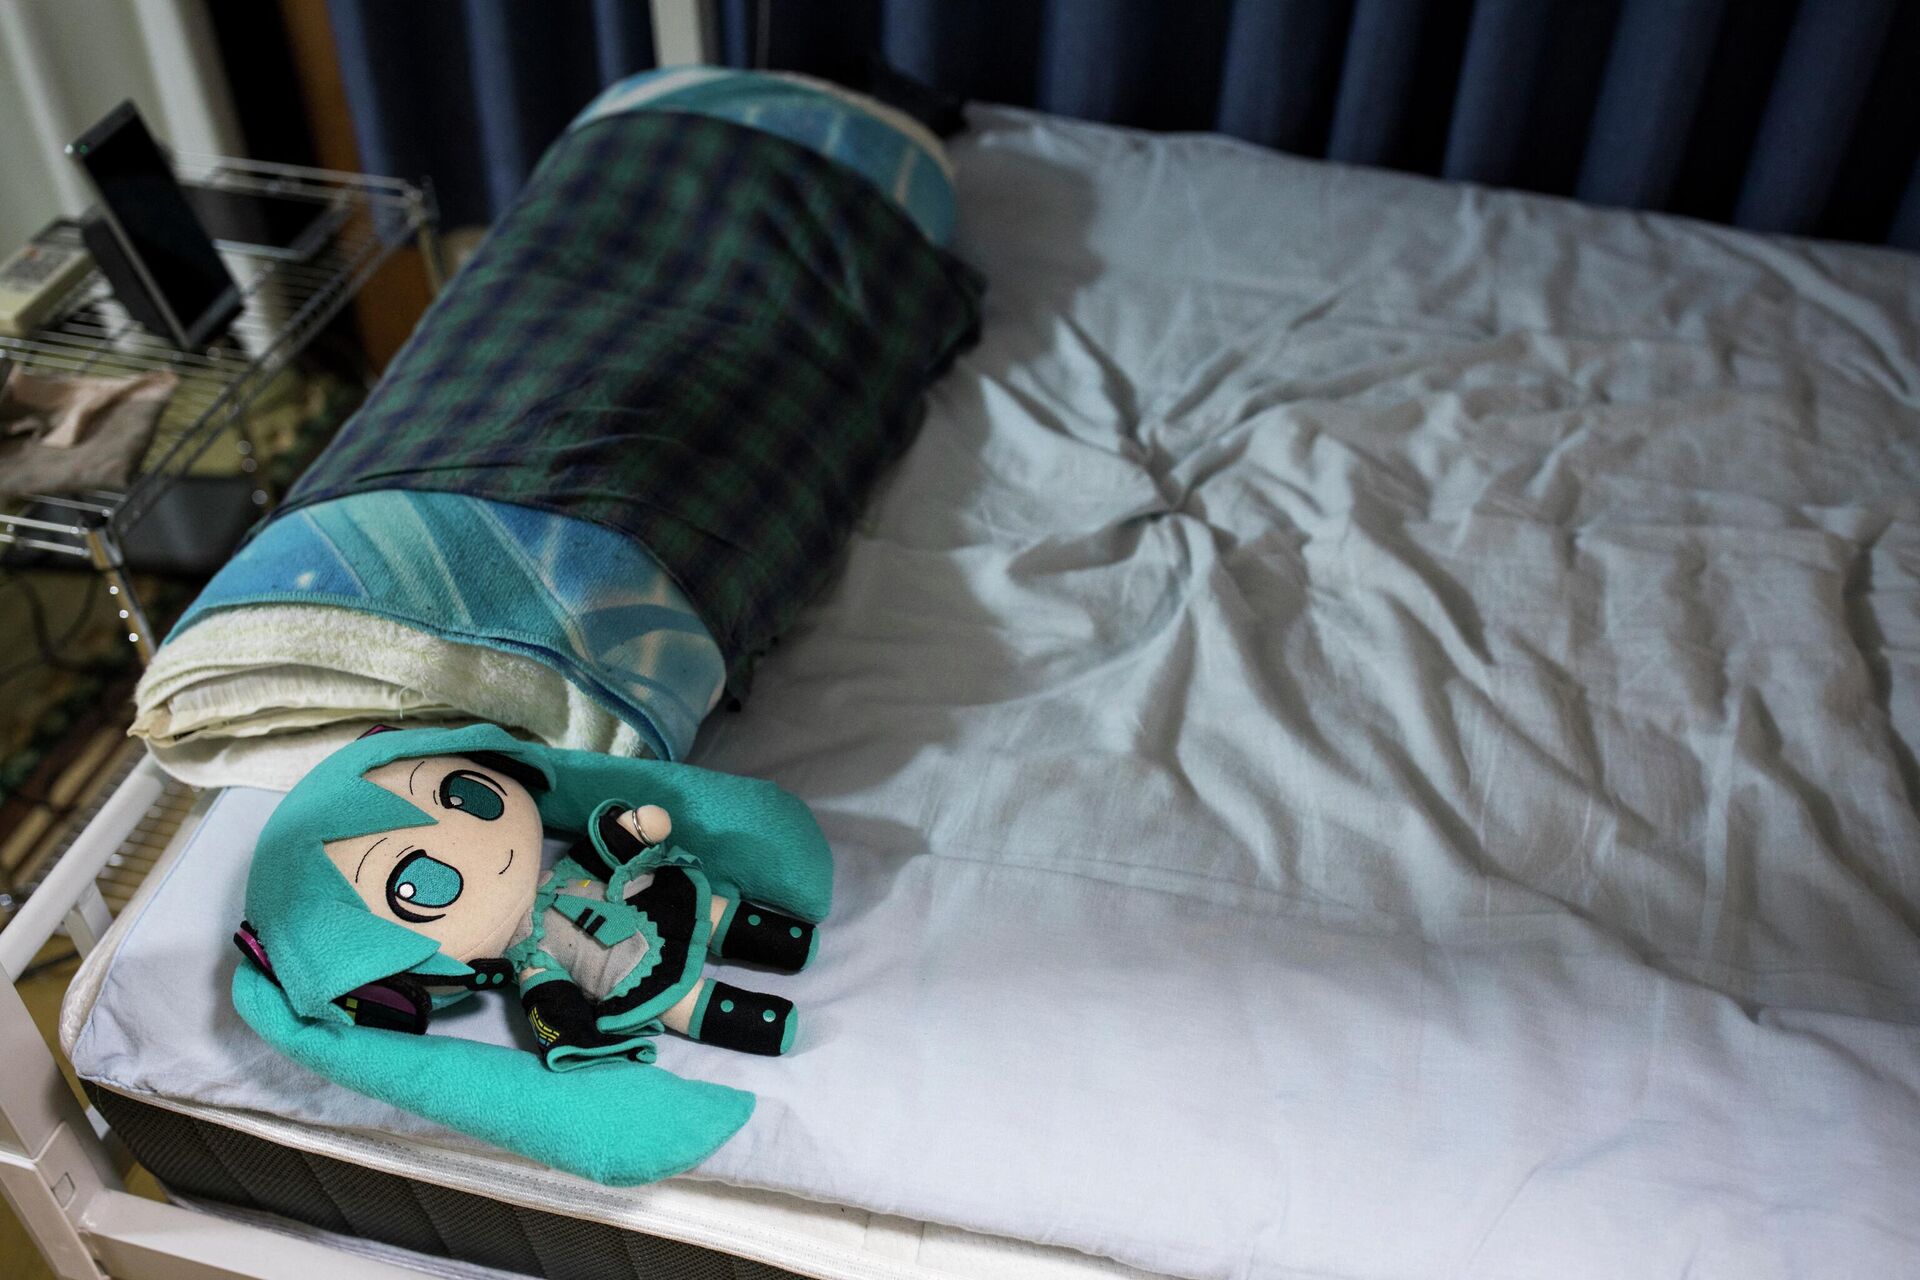 In this photograph taken on November 10, 2018 a doll of Japanese virtual reality singer Hatsune Miku, wearing a wedding ring, lies on the bed of Japanese Akihiko Kondo, at his apartment in Tokyo, a week after their marriage - Sputnik International, 1920, 28.04.2022